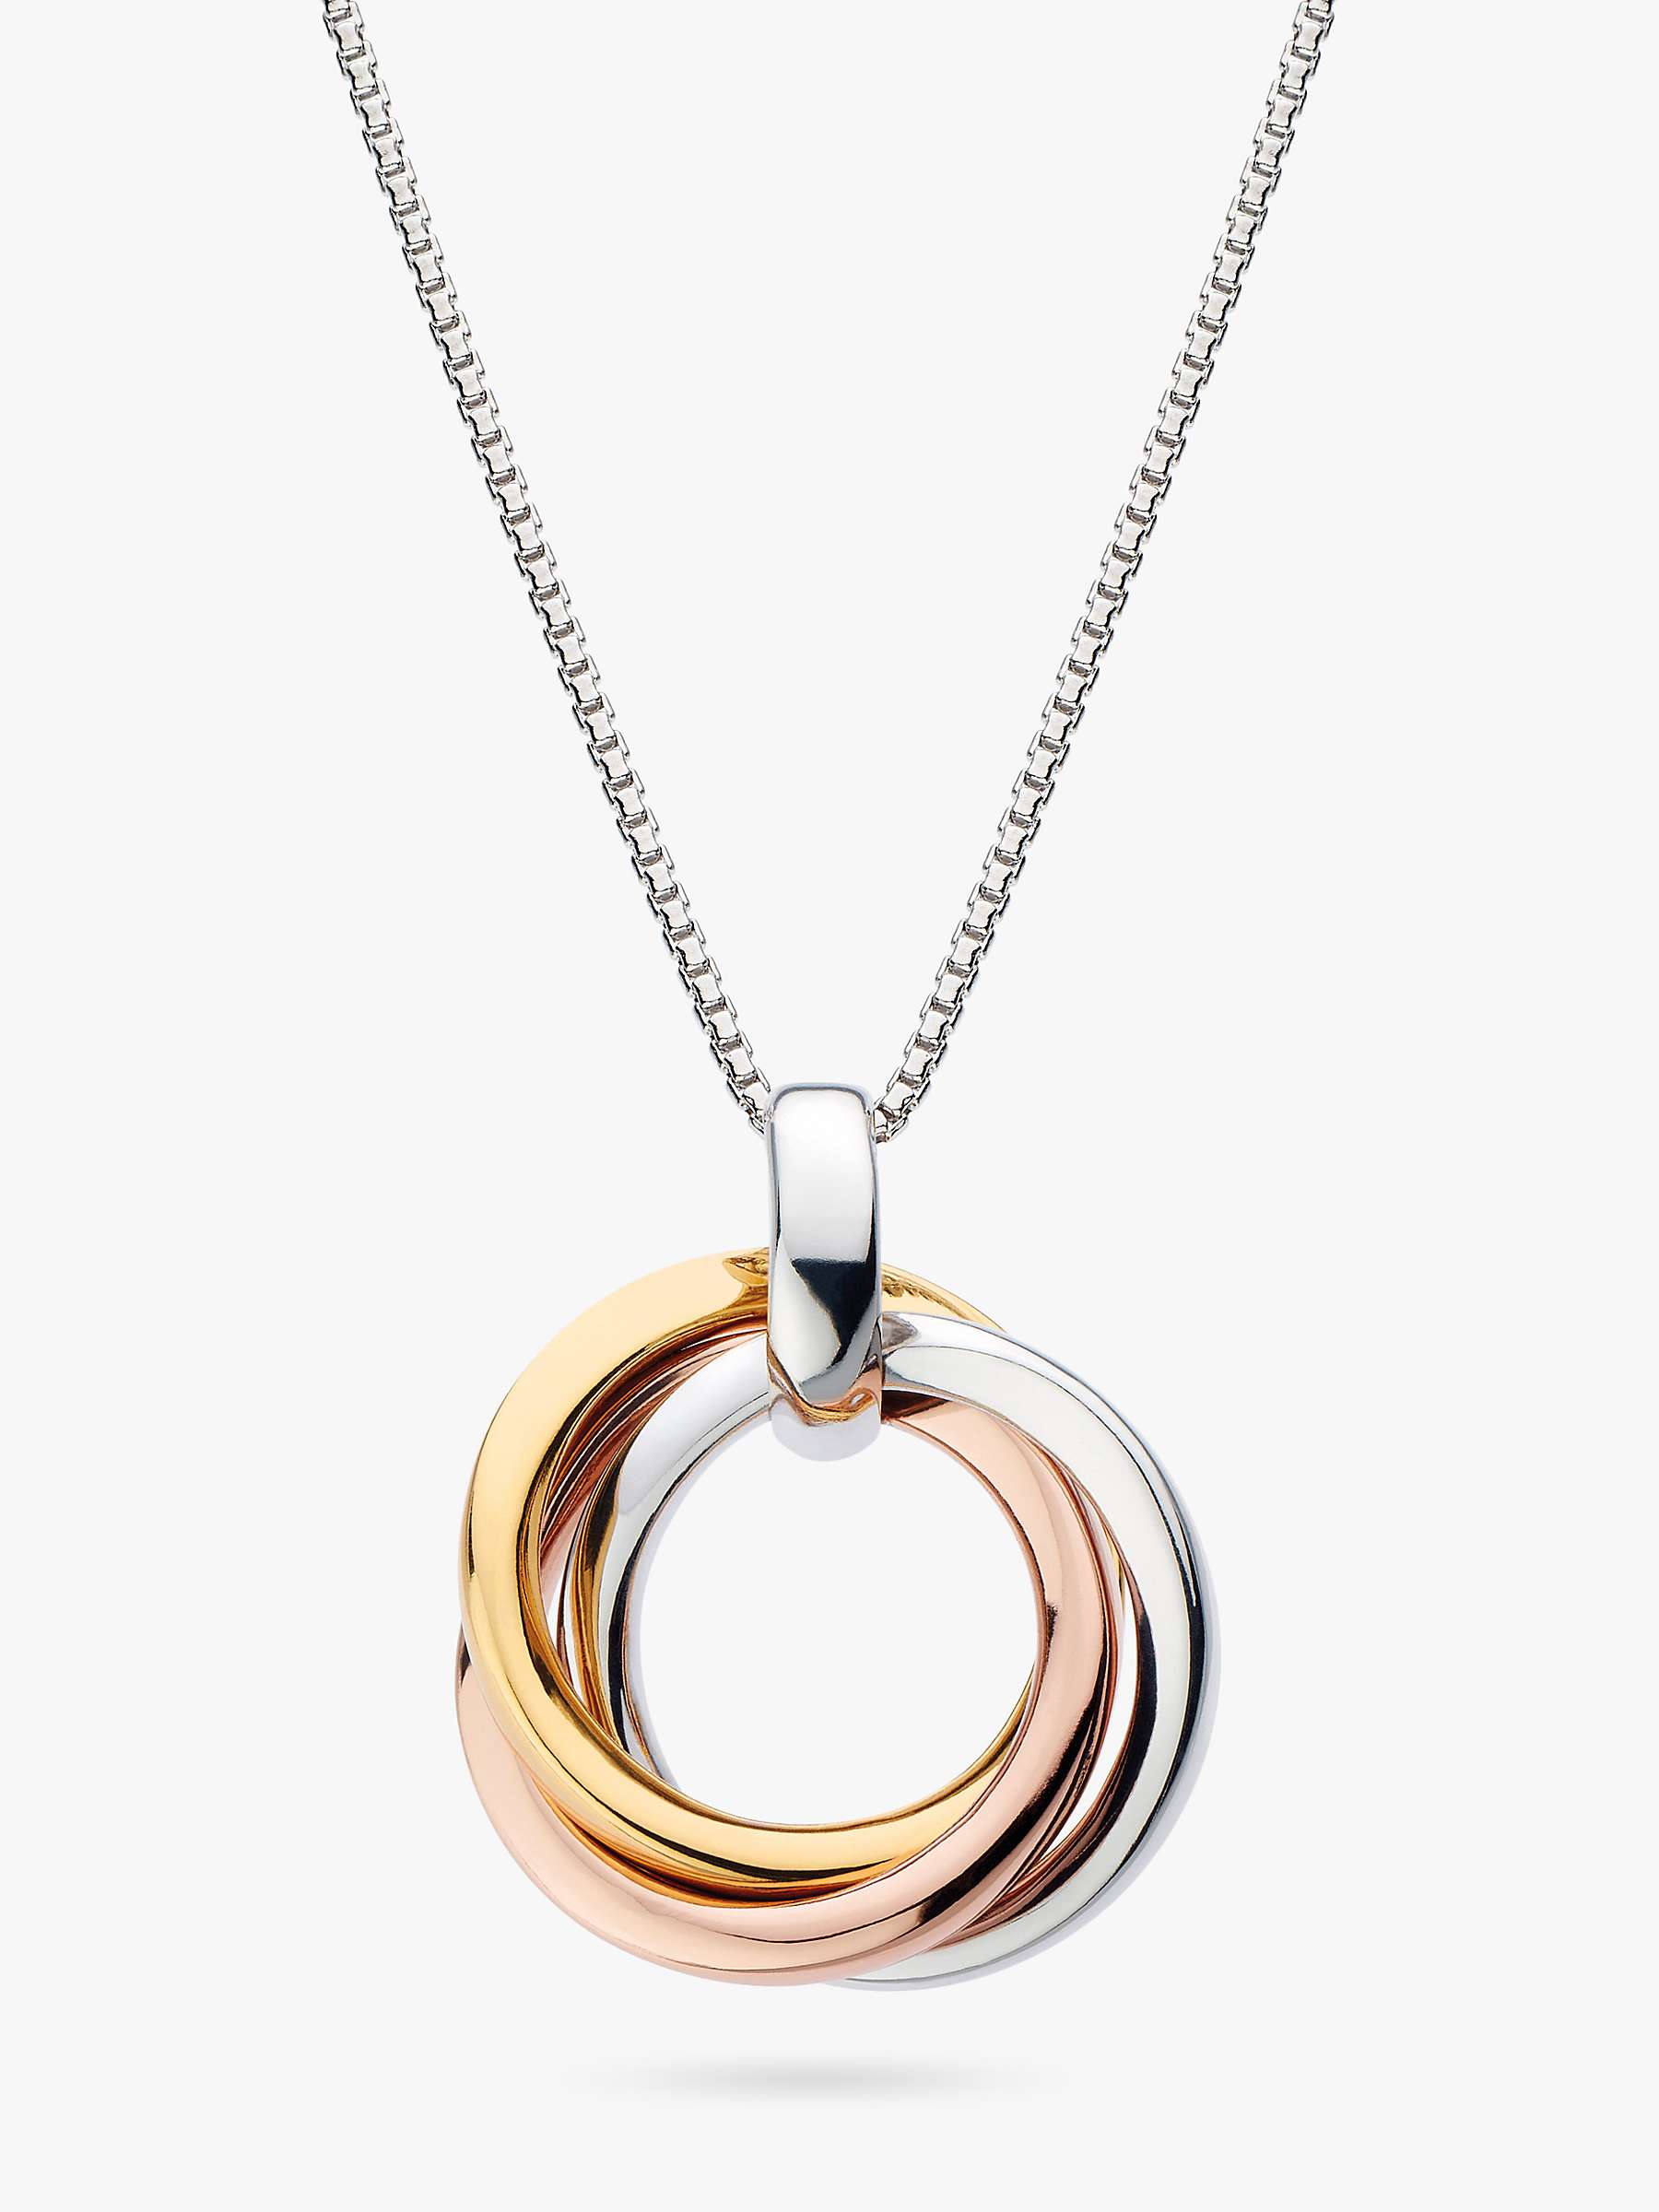 Buy Kit Heath Bevel Trilogy Pendant Necklace, Yellow & Rose Gold/Silver Online at johnlewis.com